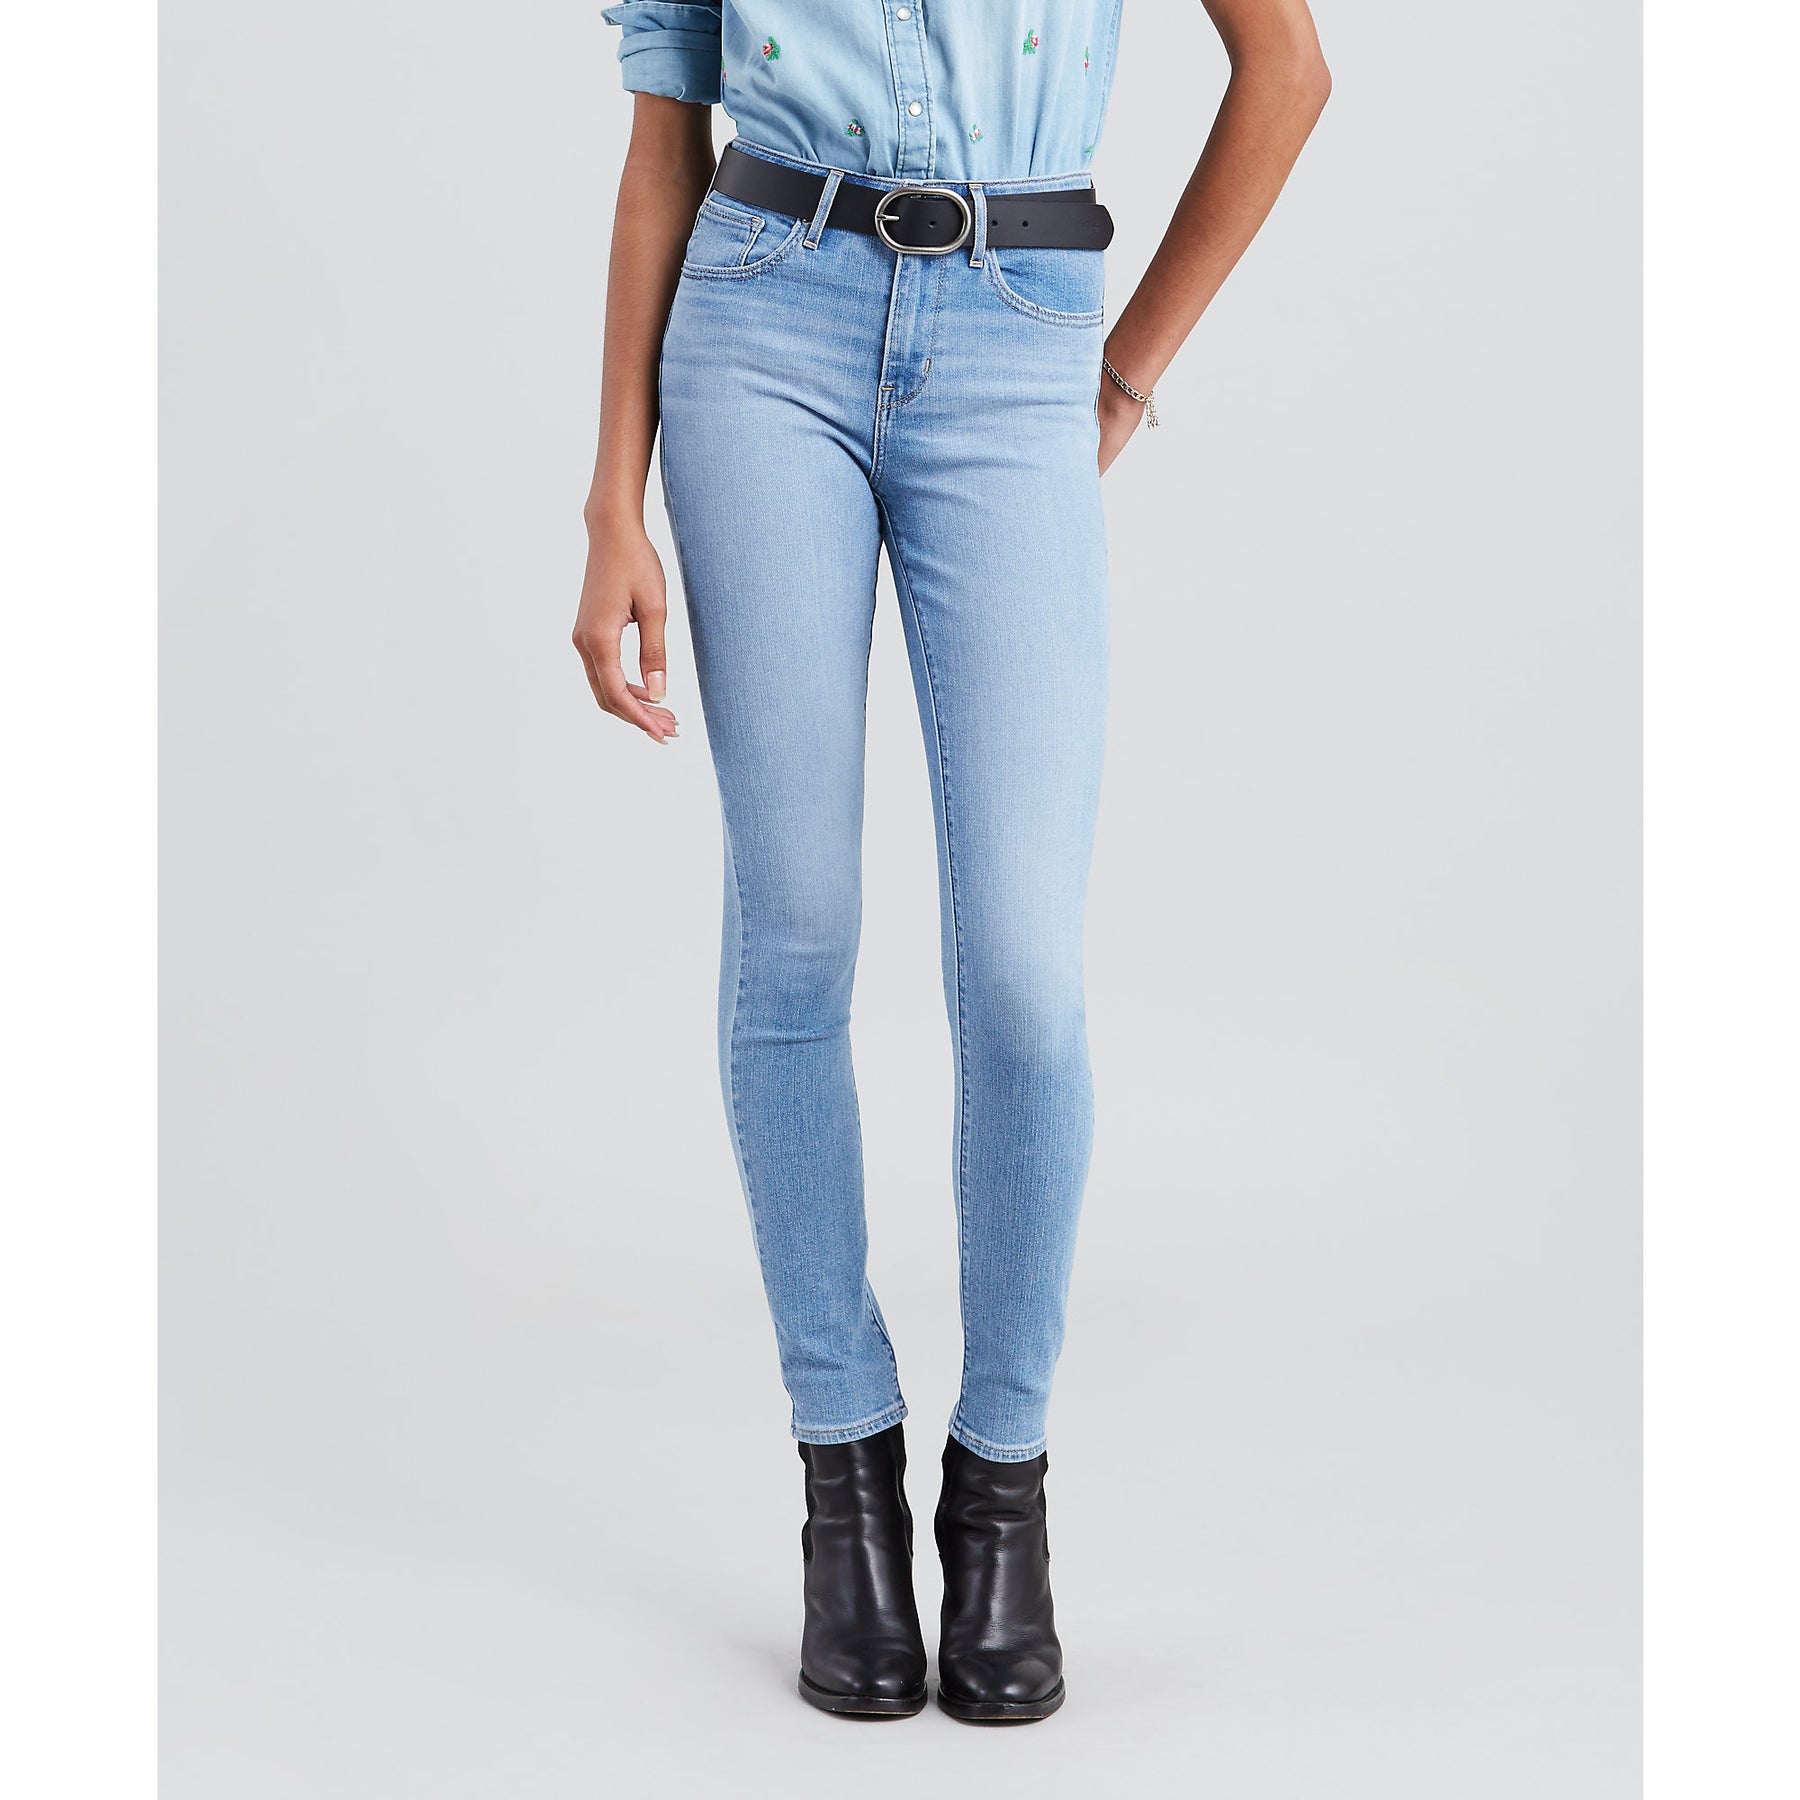 jeans levis high rise skinny